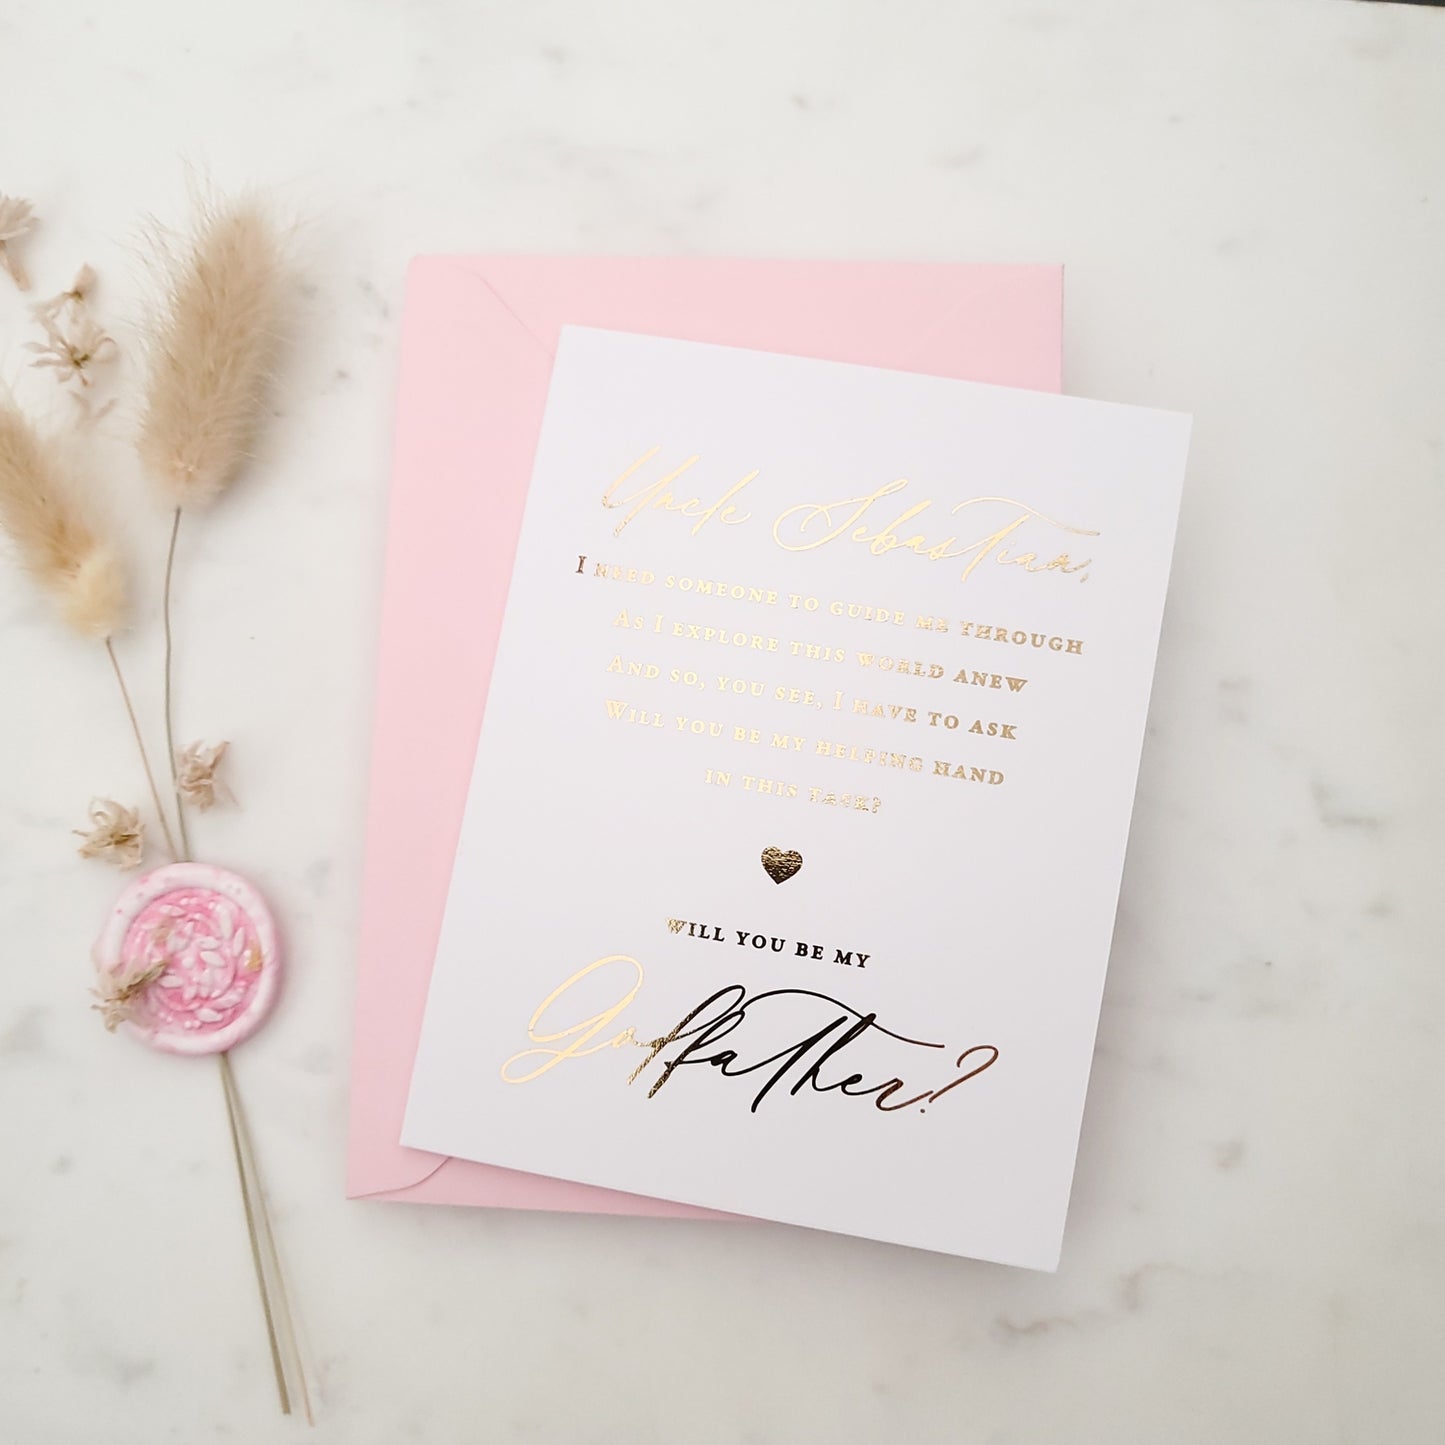 will you be my godfather proposal card with gold foiled calligraphy font - XOXOKristen